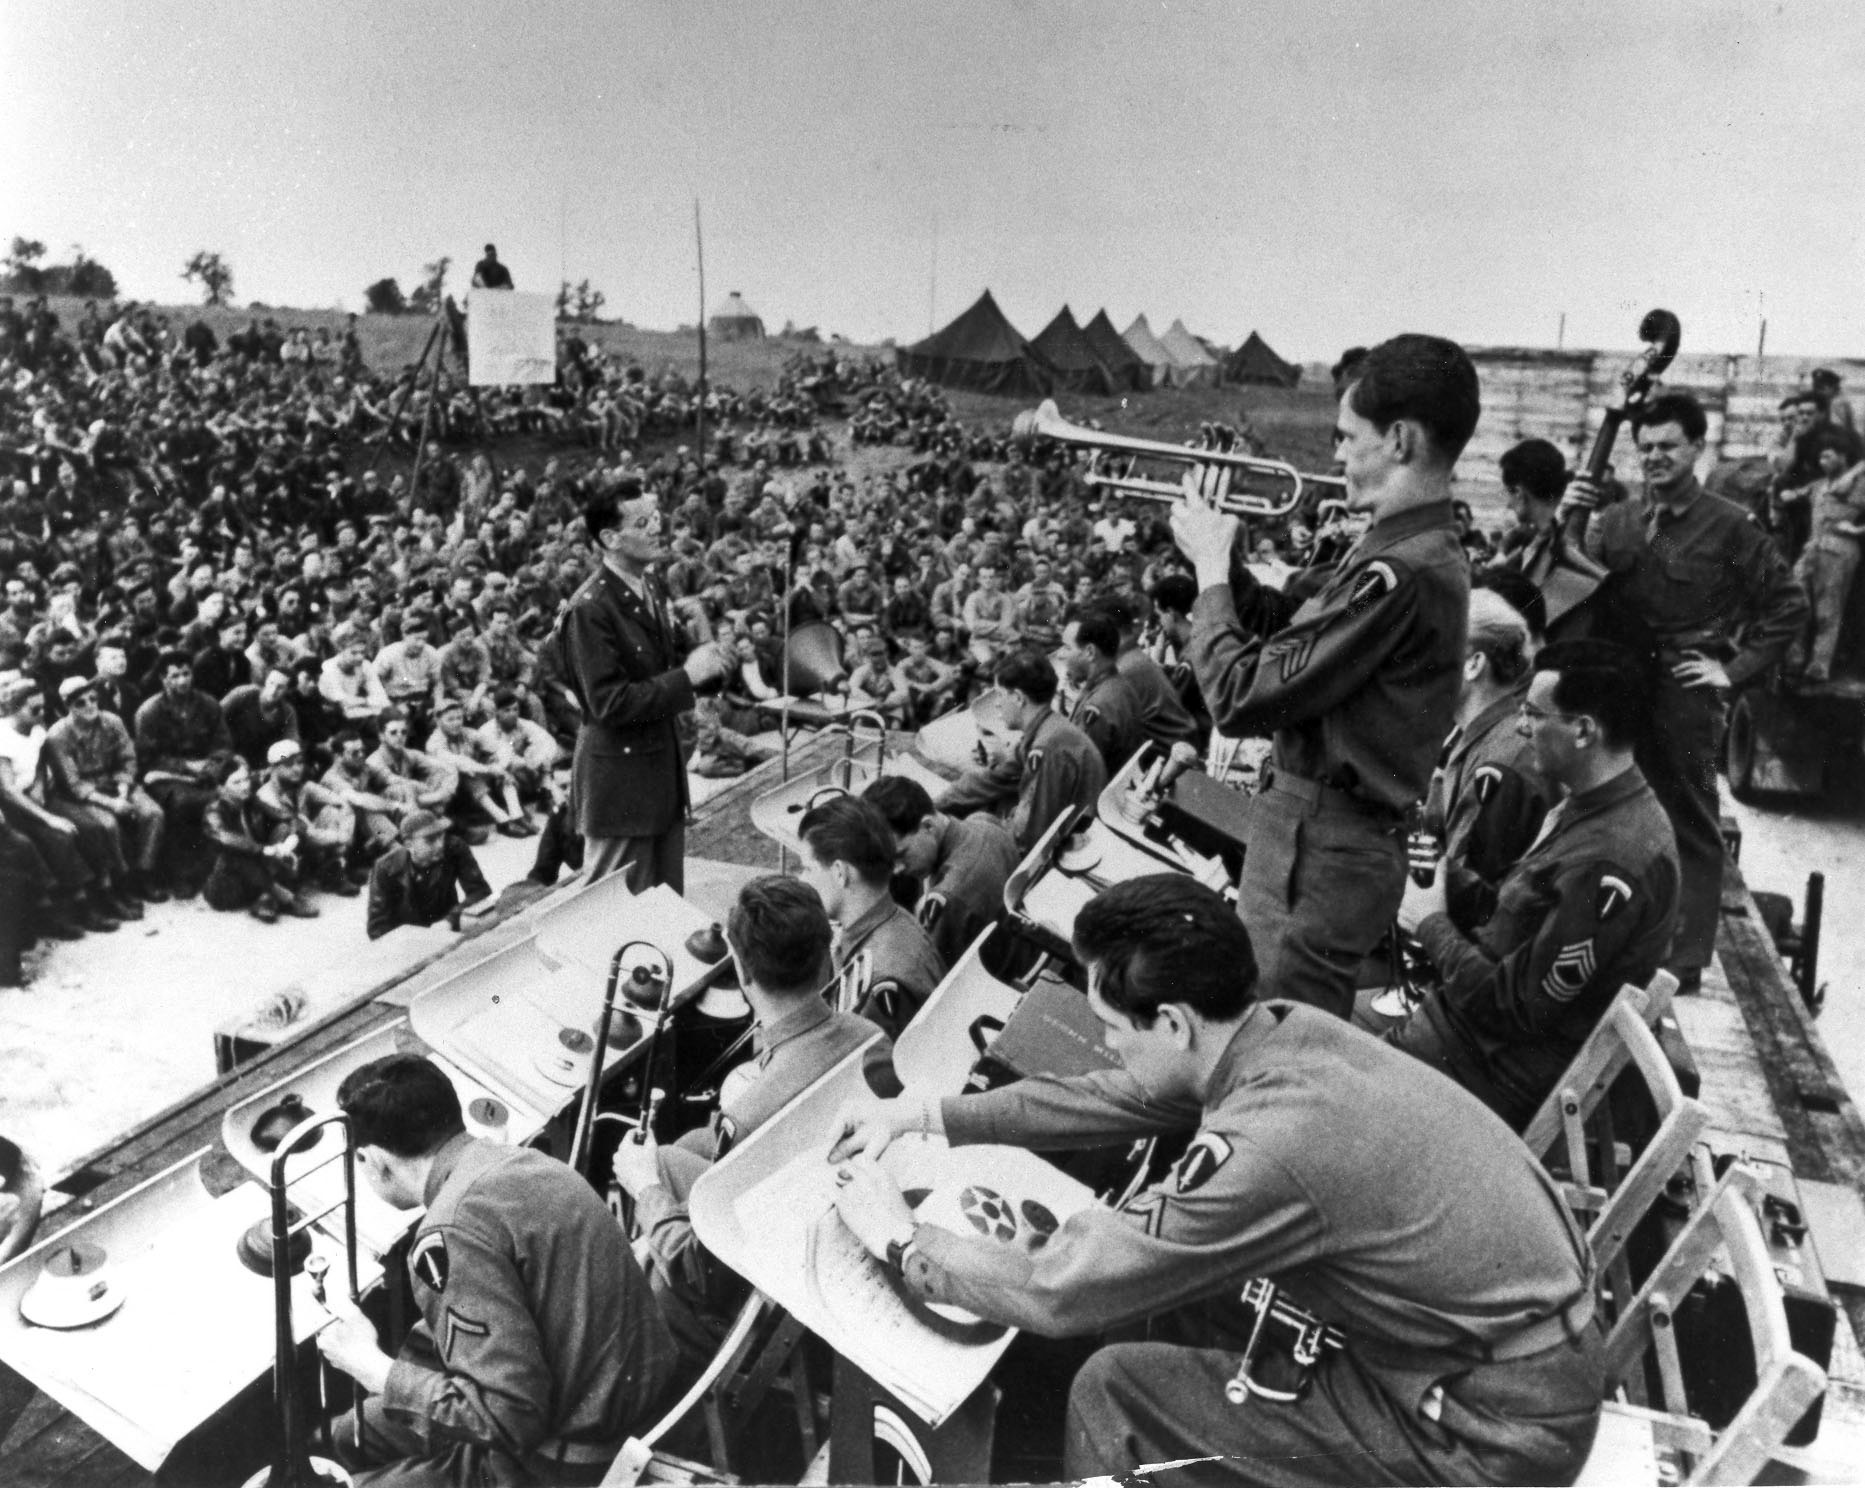 Popular bandleader Glenn Miller and his orchestra entertain a crowd in England in 1943.